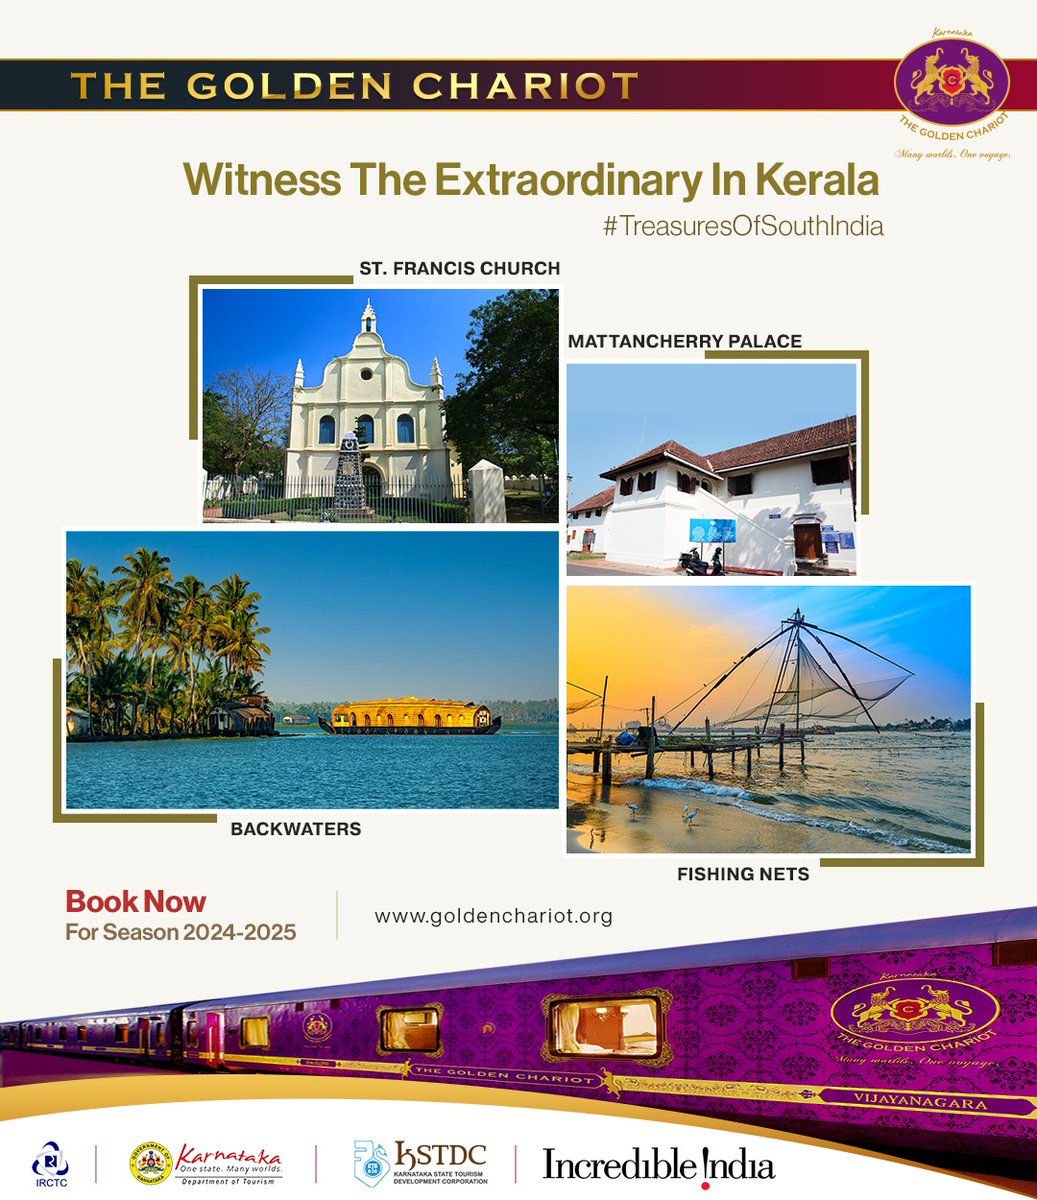 Embark on an unforgettable journey through Kerala aboard the #GoldenChariot and witness its extraordinary sights.

Visit goldenchariot.org to book your tour today.

#TreasuresOfSouthIndia #TravelExperiences #travelindia #luxurytravel #SouthIndia #travellife